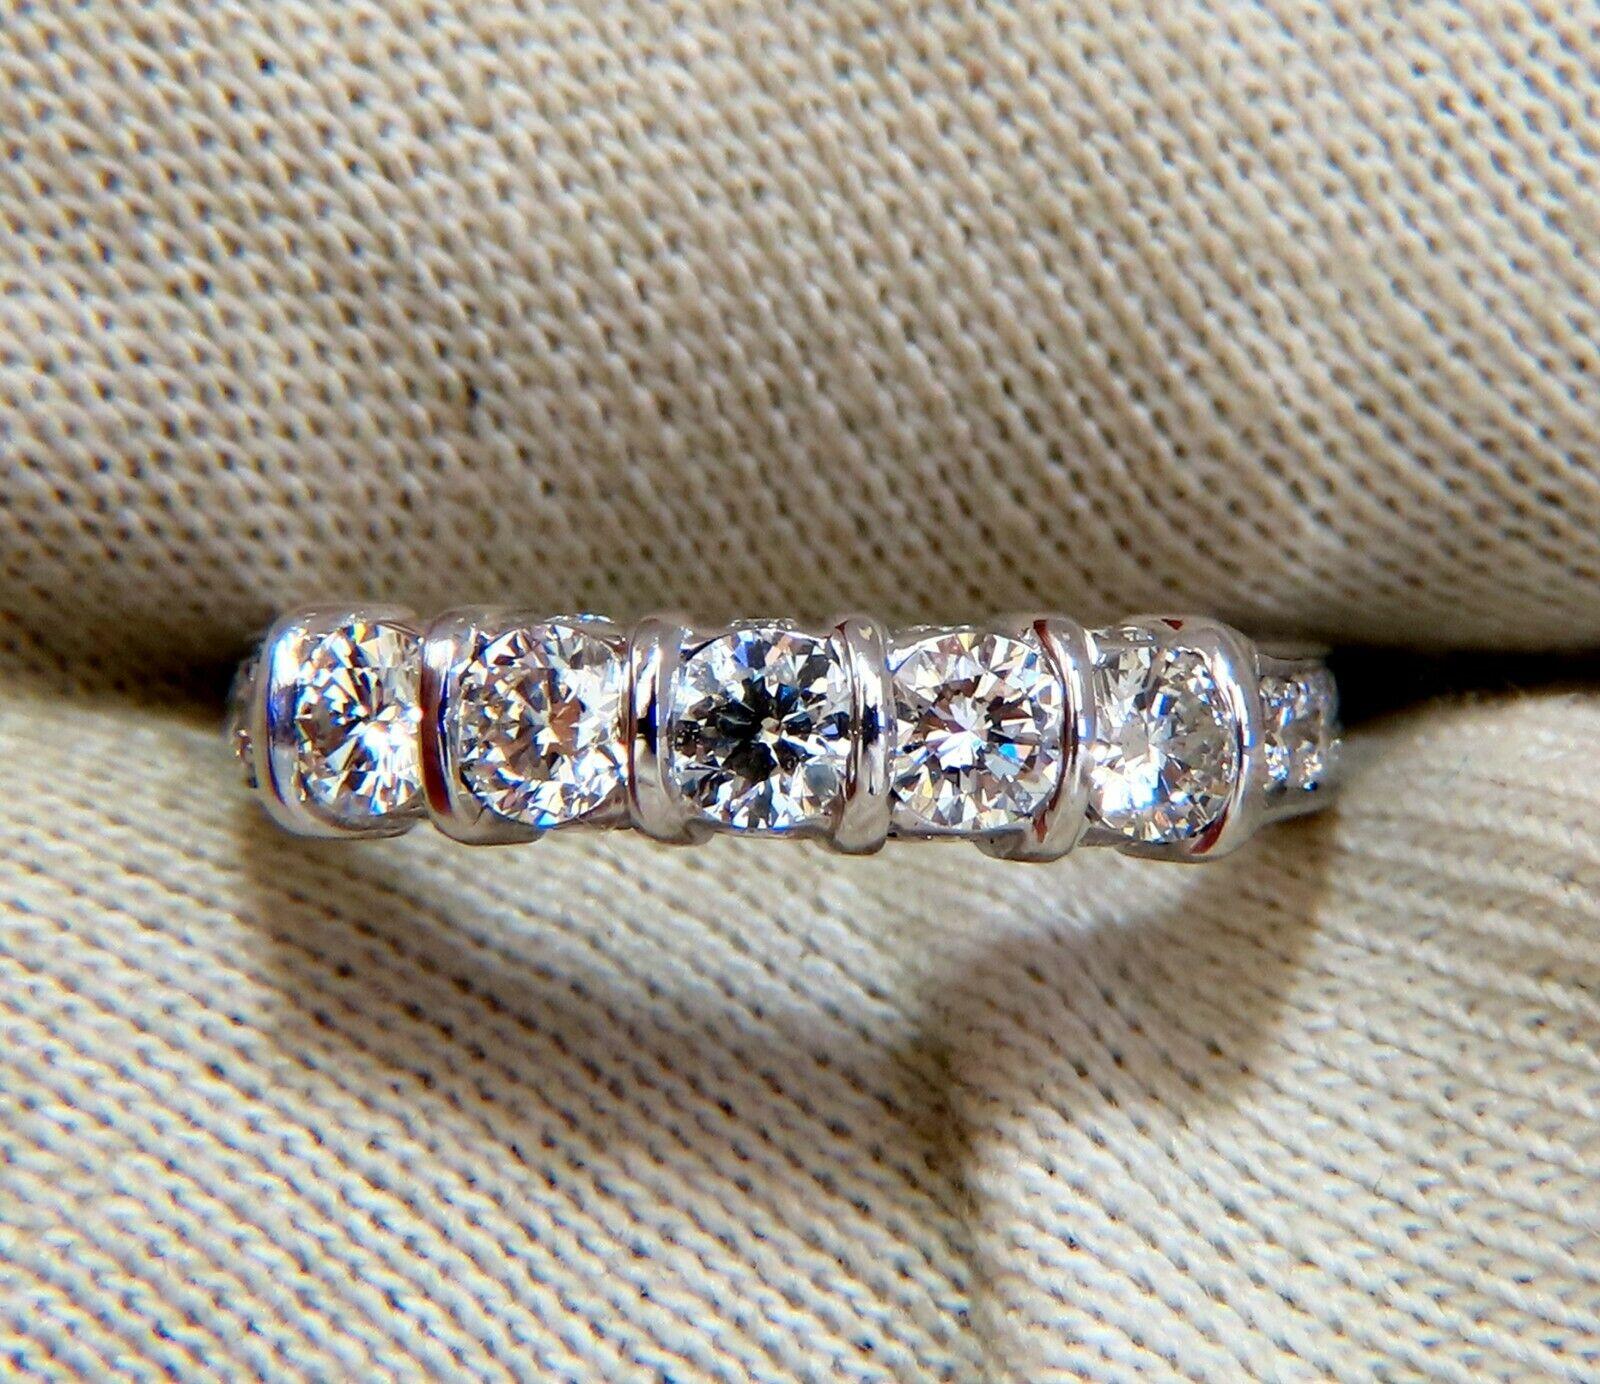 1.50 carat natural round diamonds band.

Five Stone channel set top & bead set pave on sides.

14 karat white gold 4 g

Ring is 4.6 mm wide,

3.6 mm depth

current size 7.75

$5,000 appraisal certificate will accompany